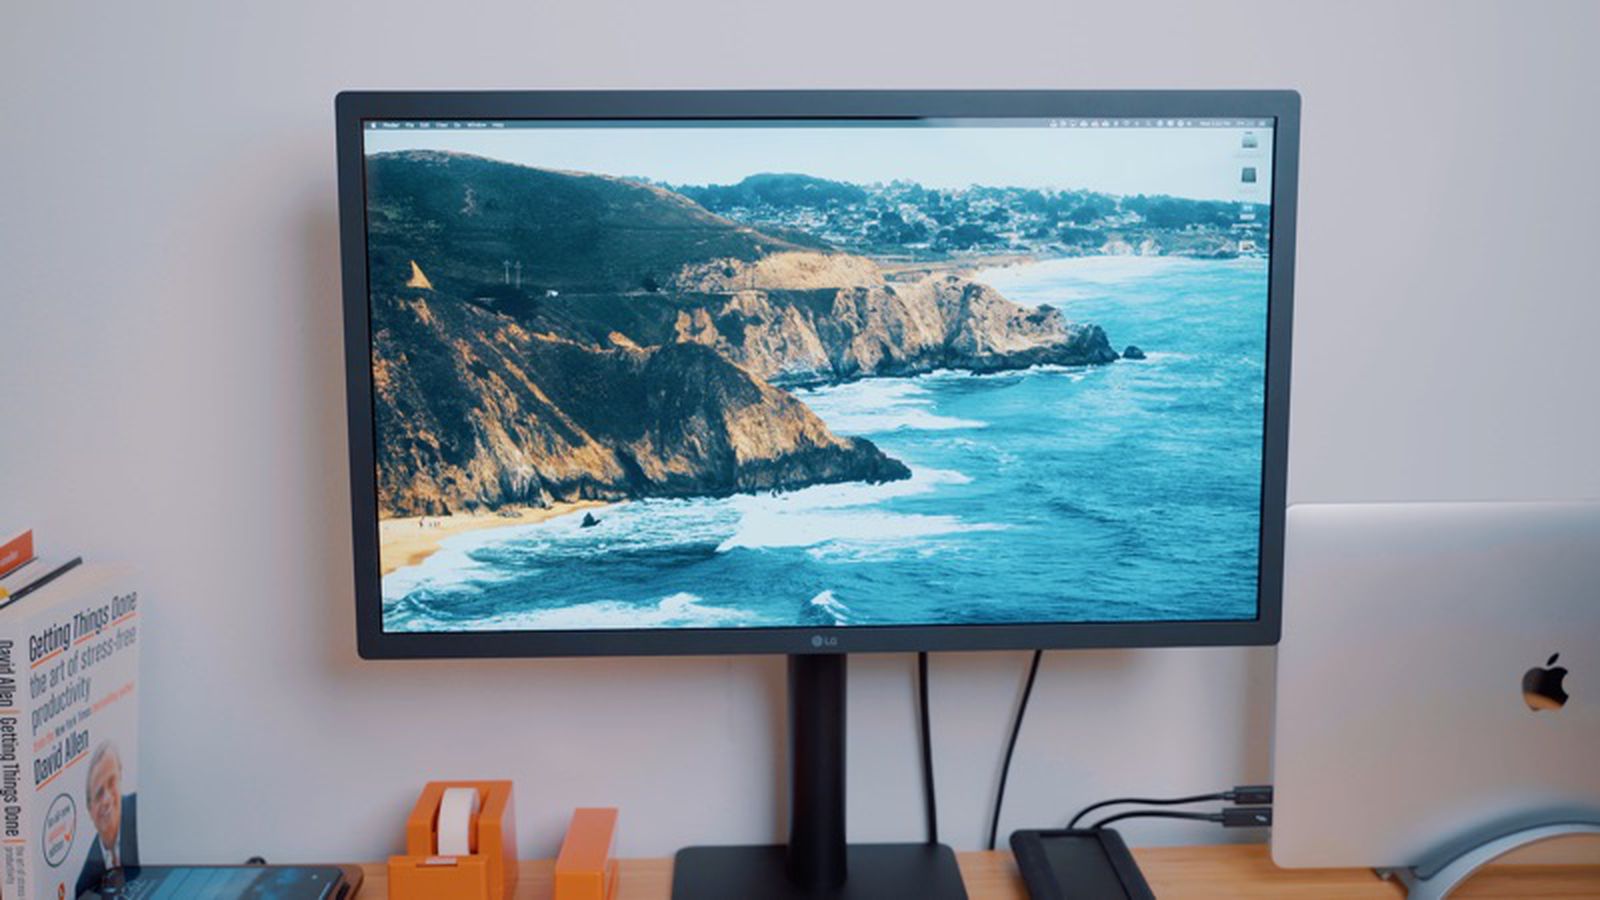 Hands-On With the New 4K 23.7-Inch LG UltraFine Display